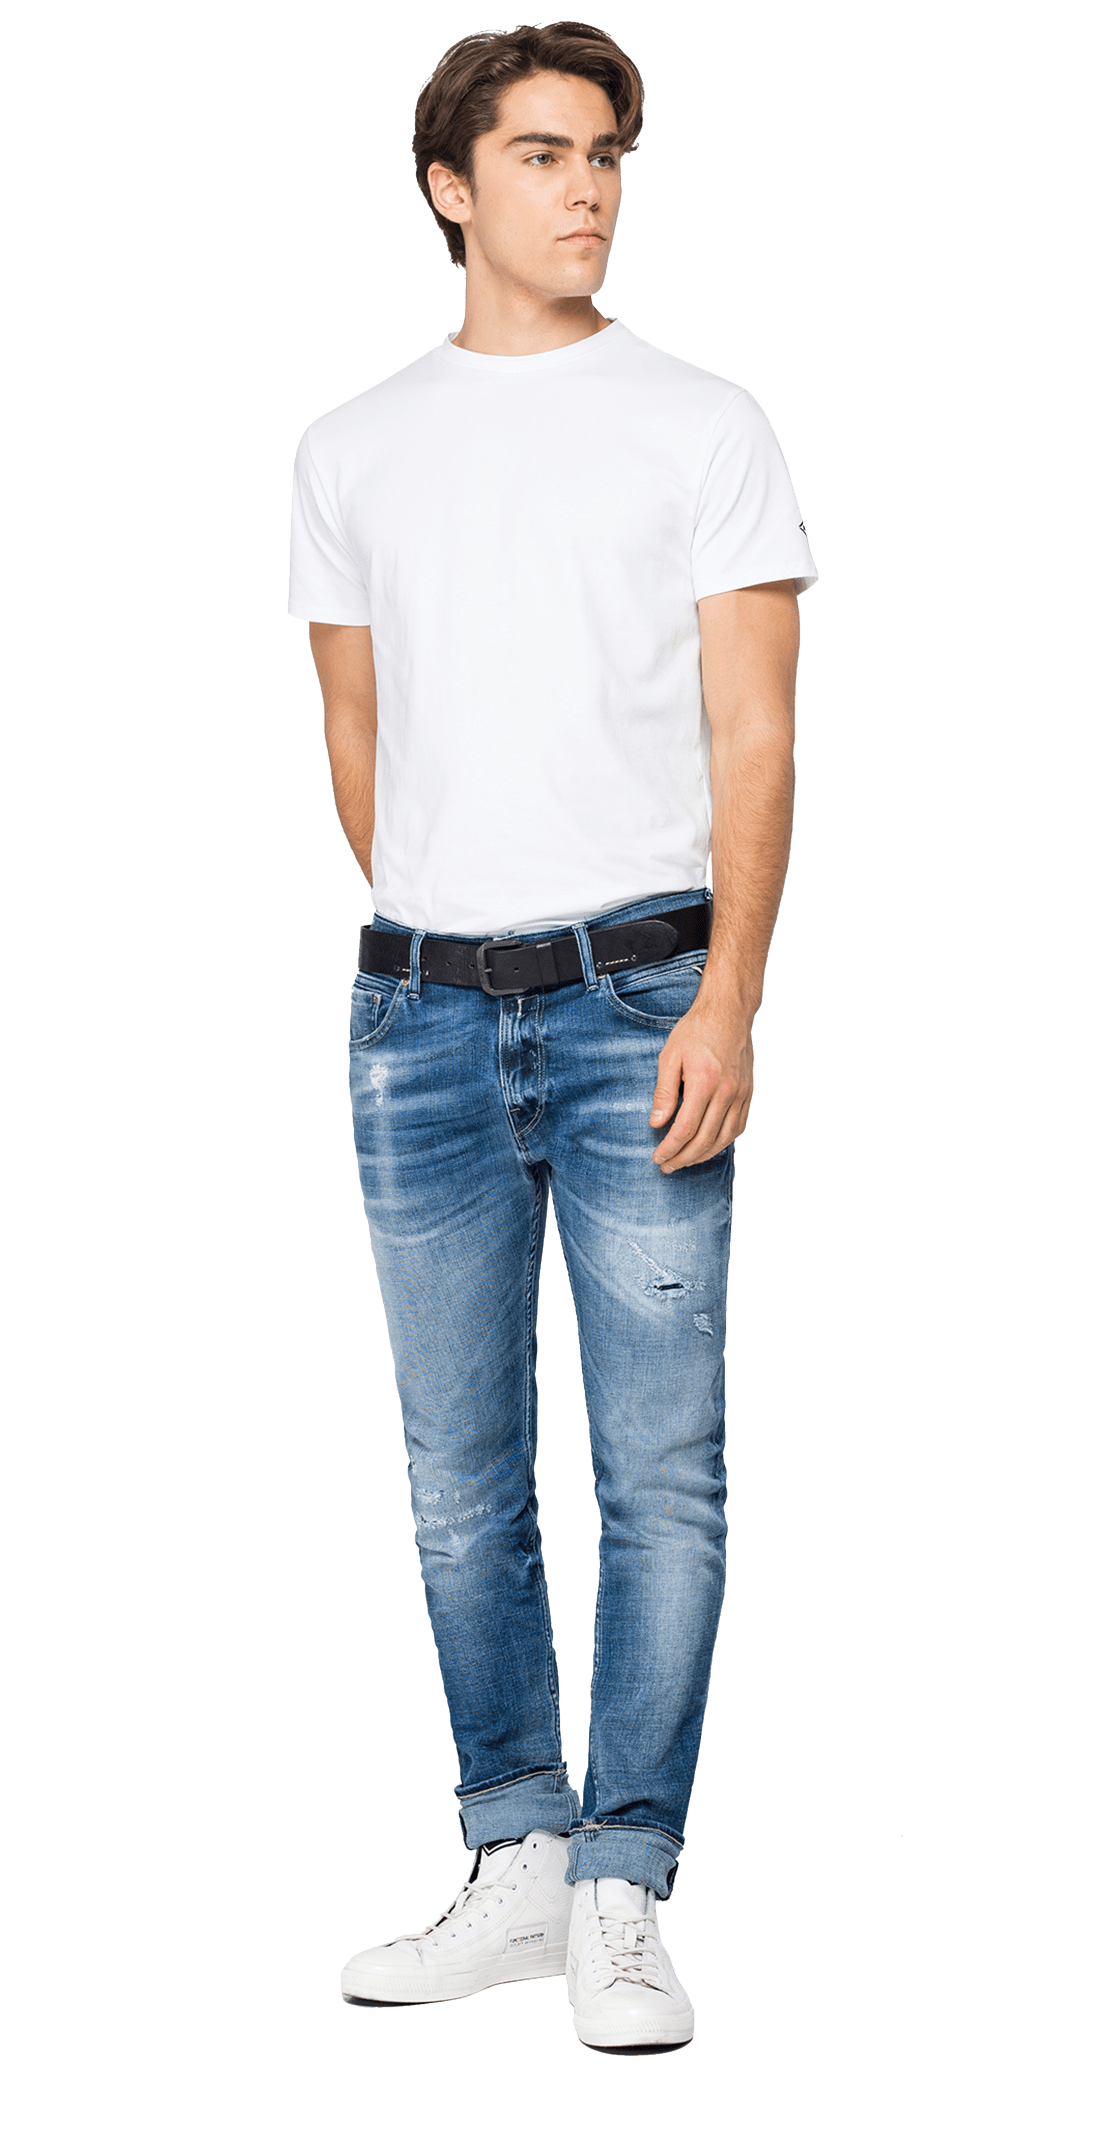 SKINNY FIT AGED 10 YEARS SUSTAINABLE CYCLE JONDRILL JEANS